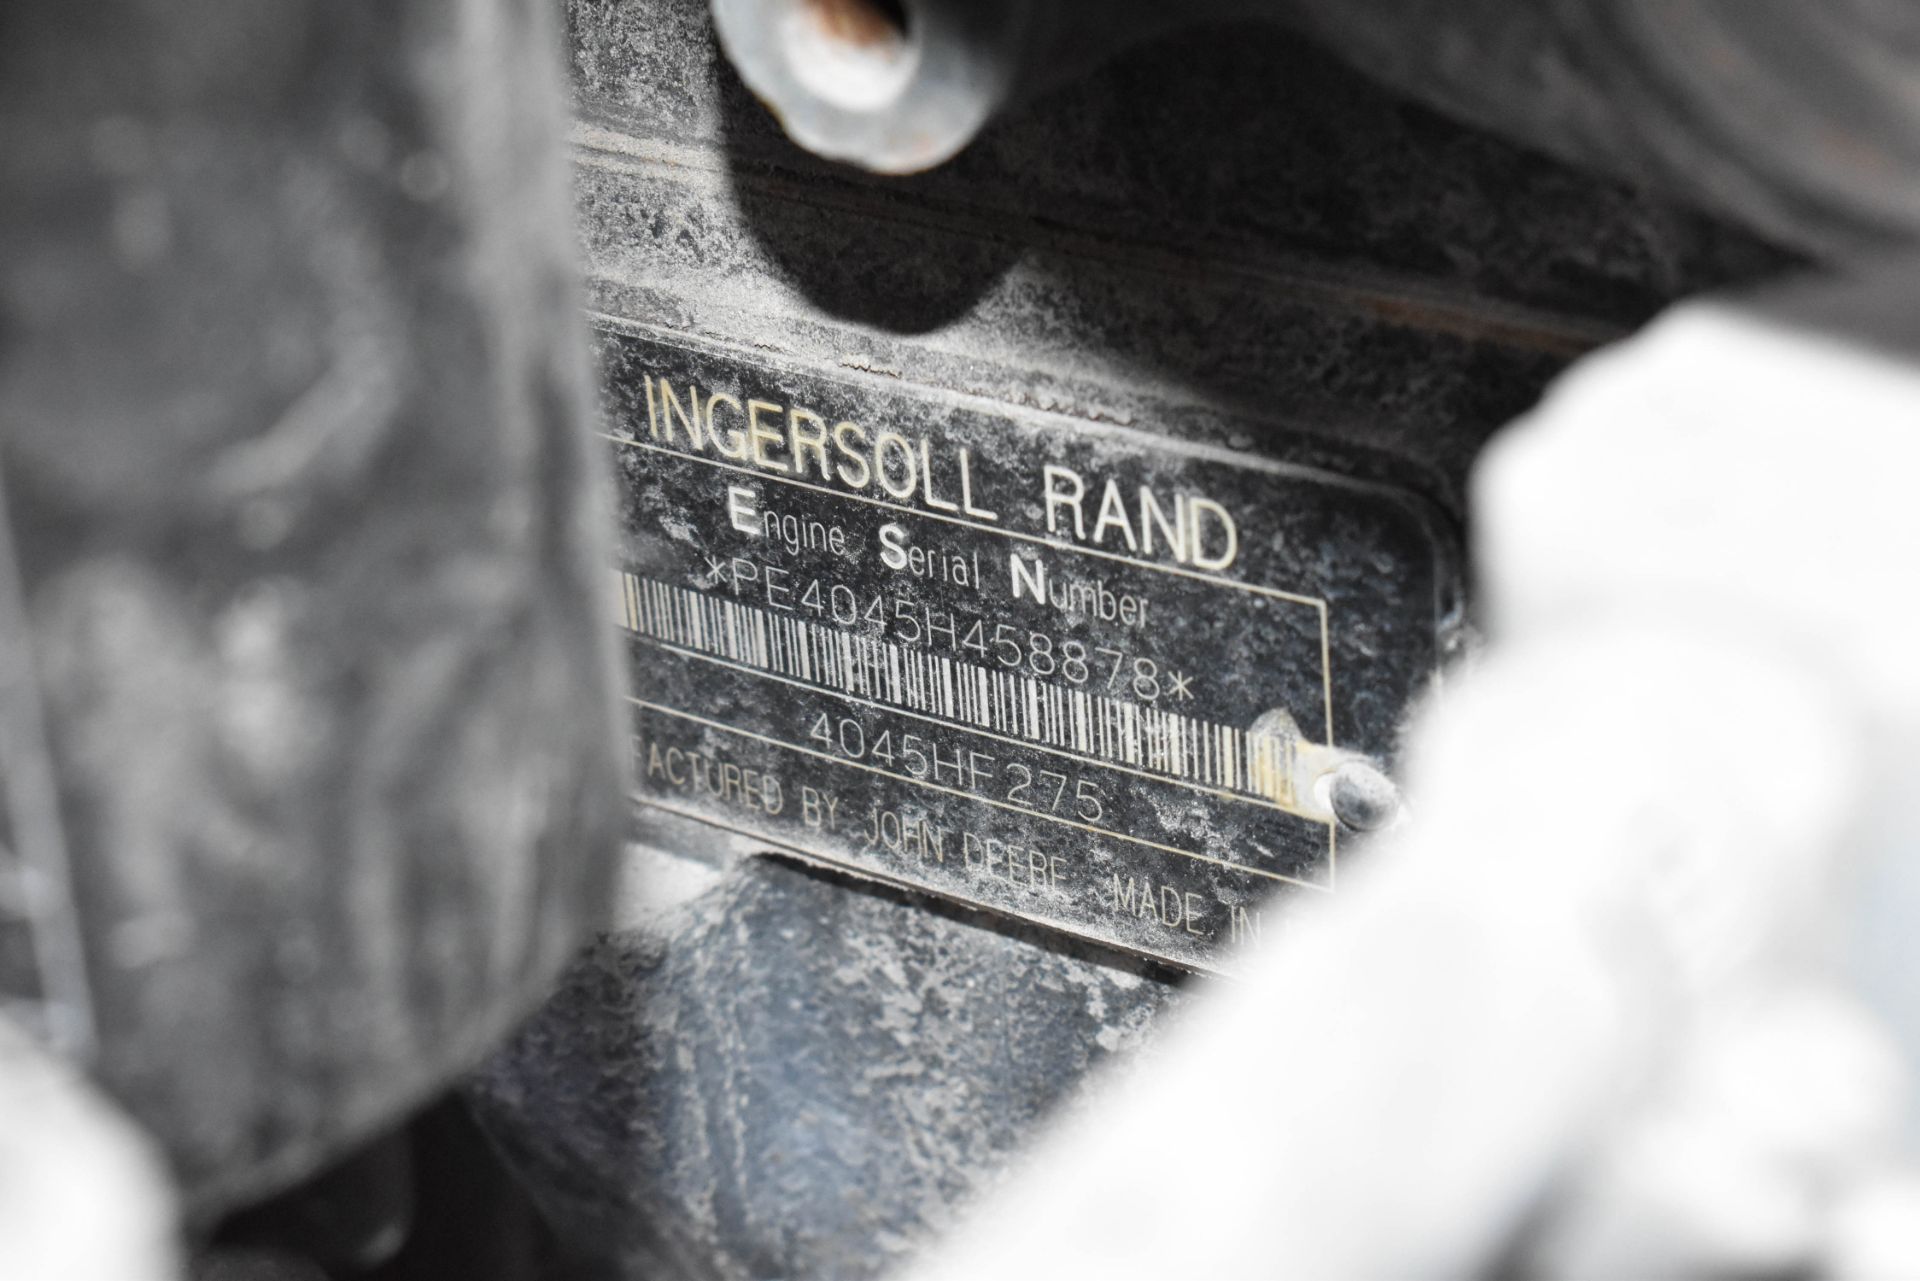 INGERSOLL-RAND XP 375 TOW-BEHIND DIESEL POWERED AIR COMPRESSOR WITH INGERSOLL-RAND 4045HF275I DIESEL - Image 10 of 13